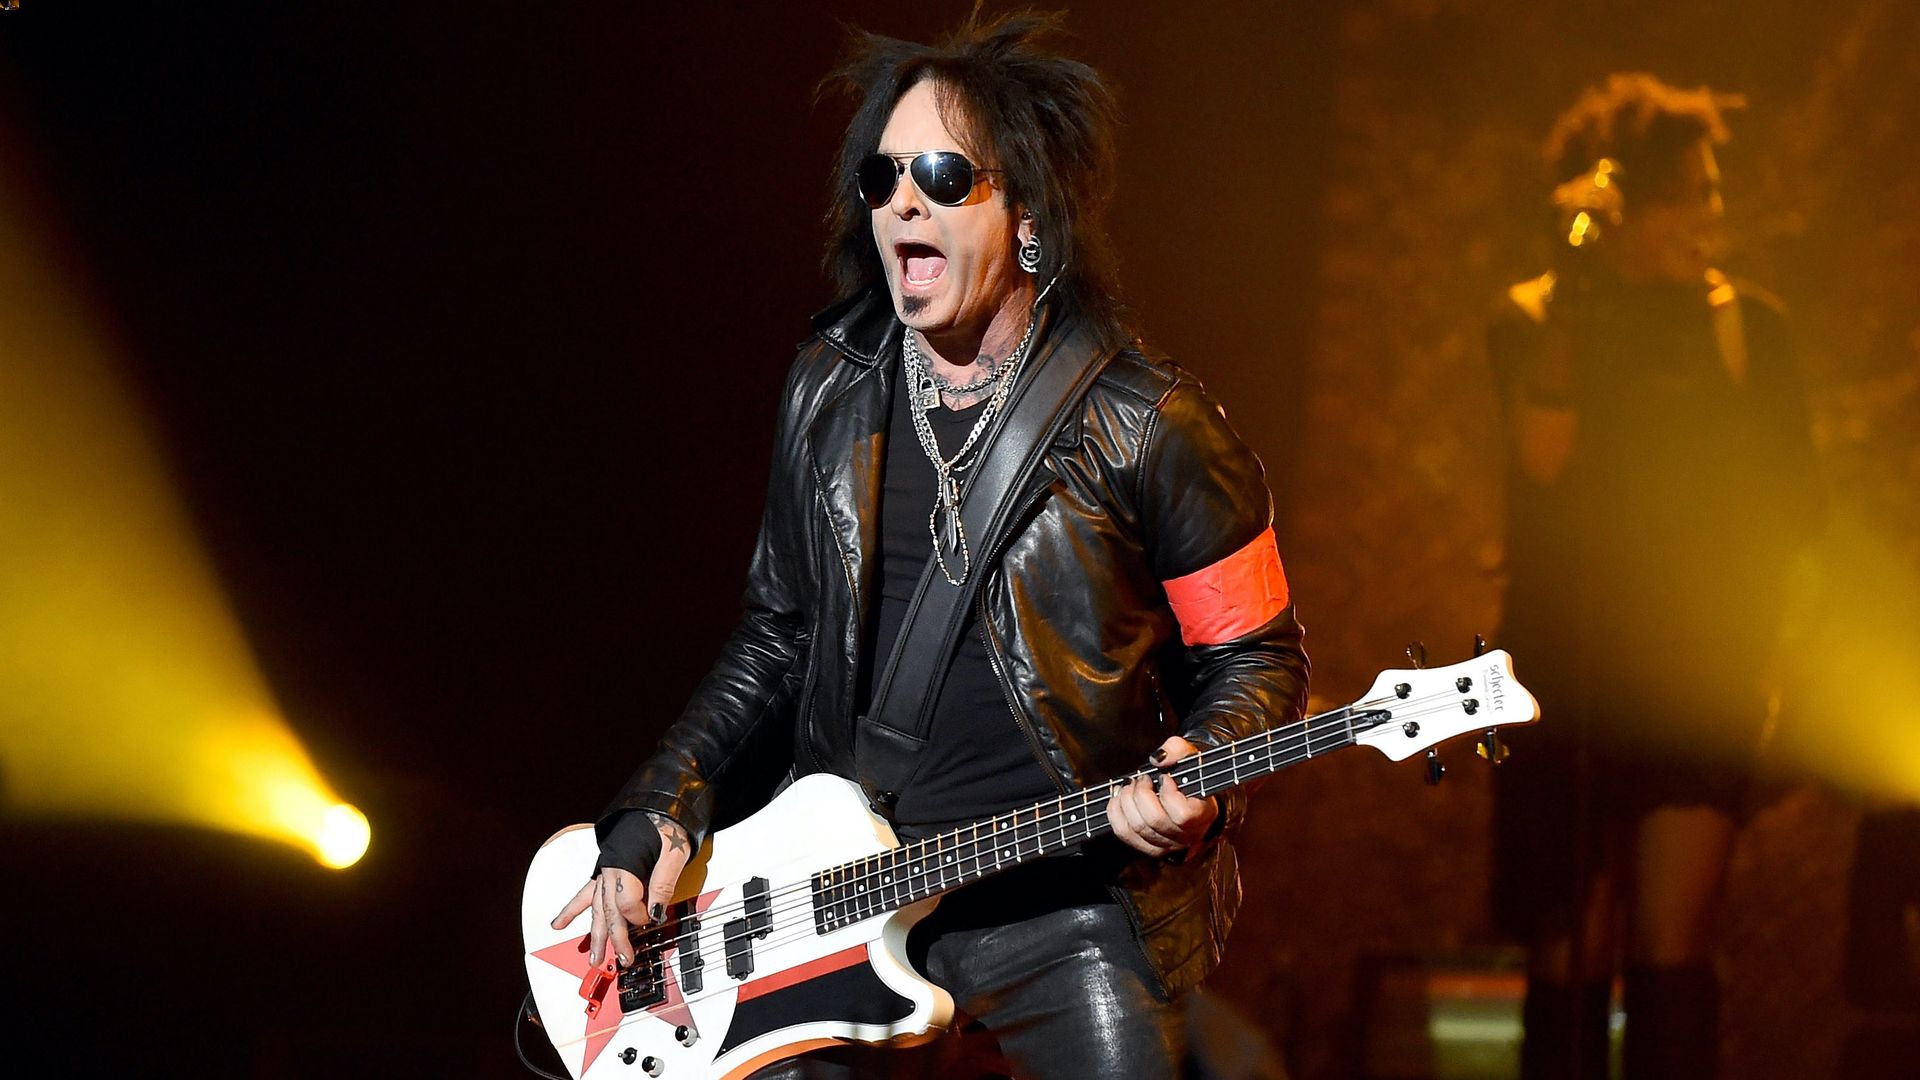 What Bass Does Nikki Sixx Play